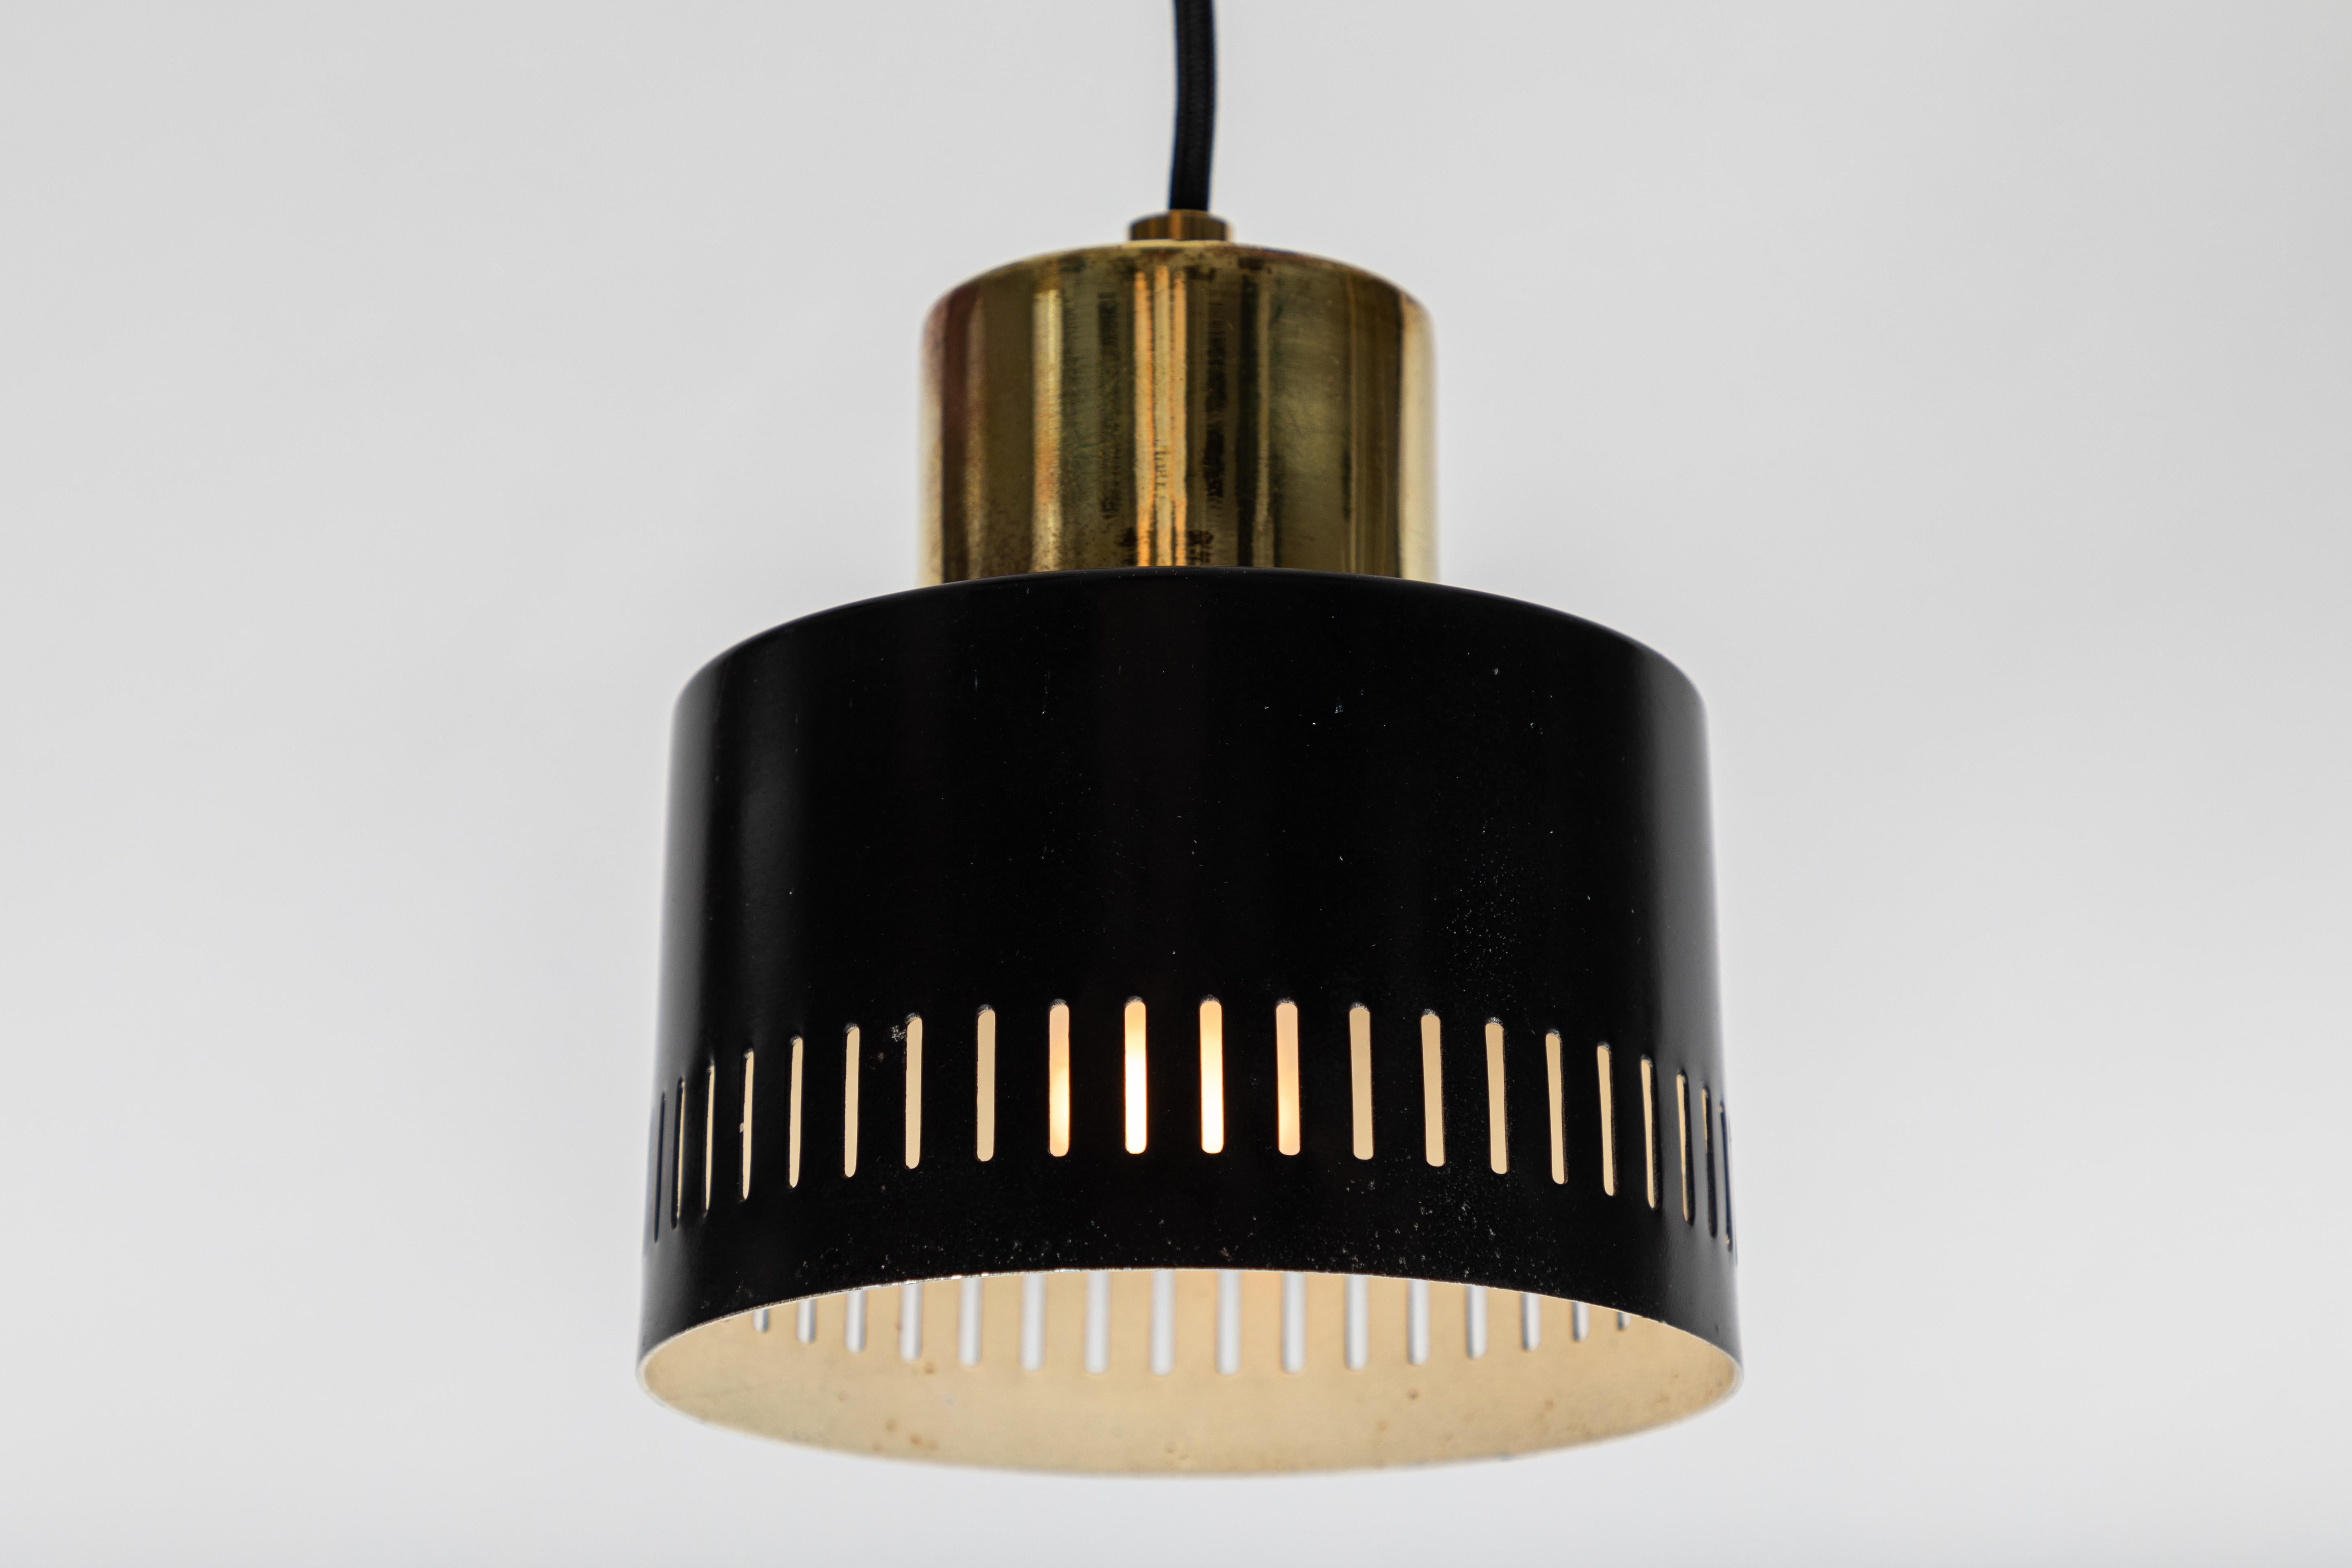 1950s Italian pendant in black and brass attributed to Stilnovo. A quintessentially 1950s Italian design executed in black panted metal and polished brass with a custom fabricated architectural ceiling canopy for mounting over a standard American